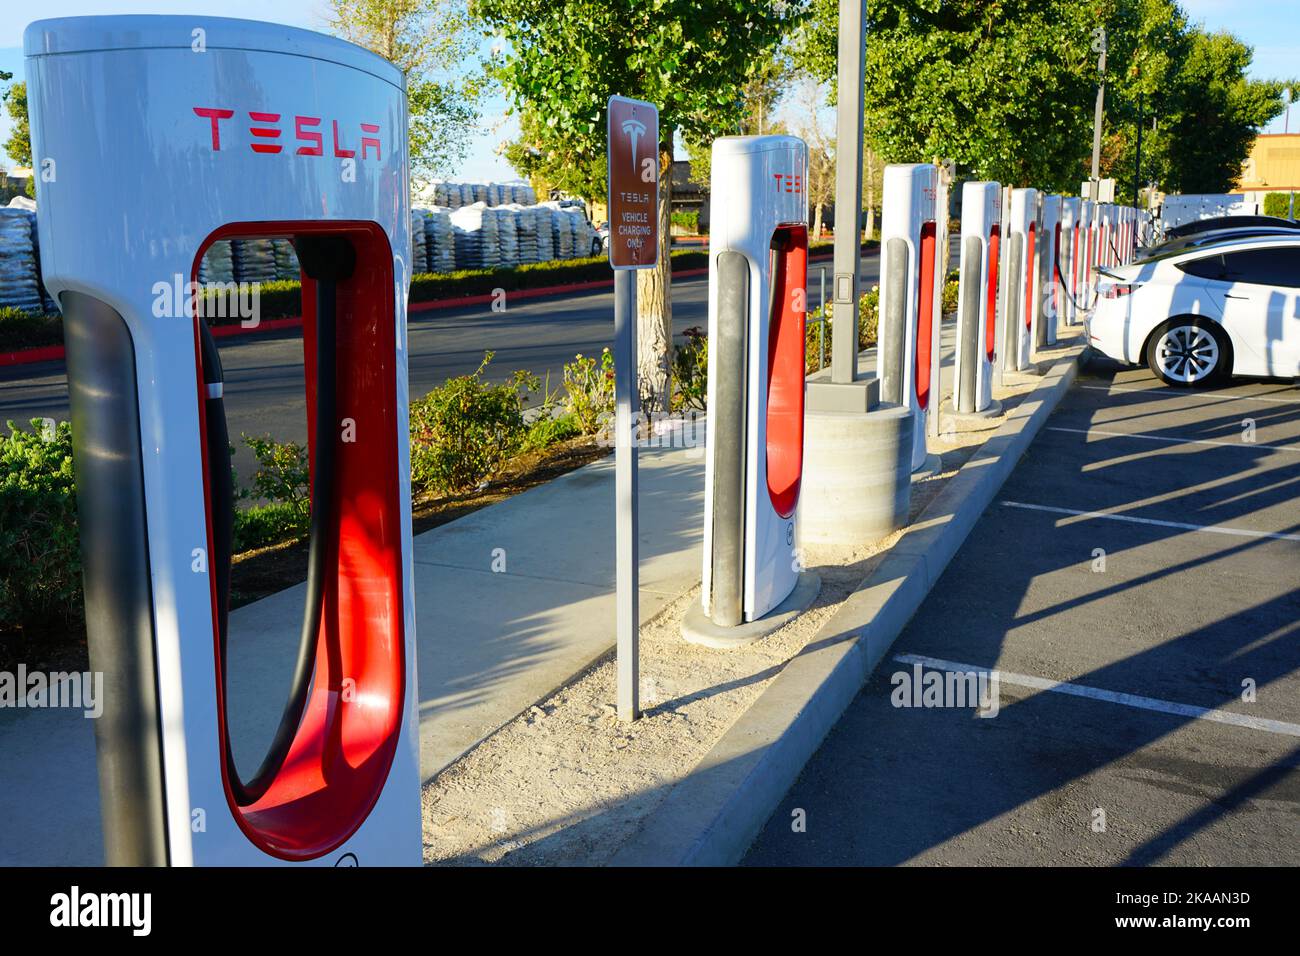 Menifee, CA, USA - October 31, 2022: A row of white Tesla charging at Tesla Supercharger Stations. Stock Photo